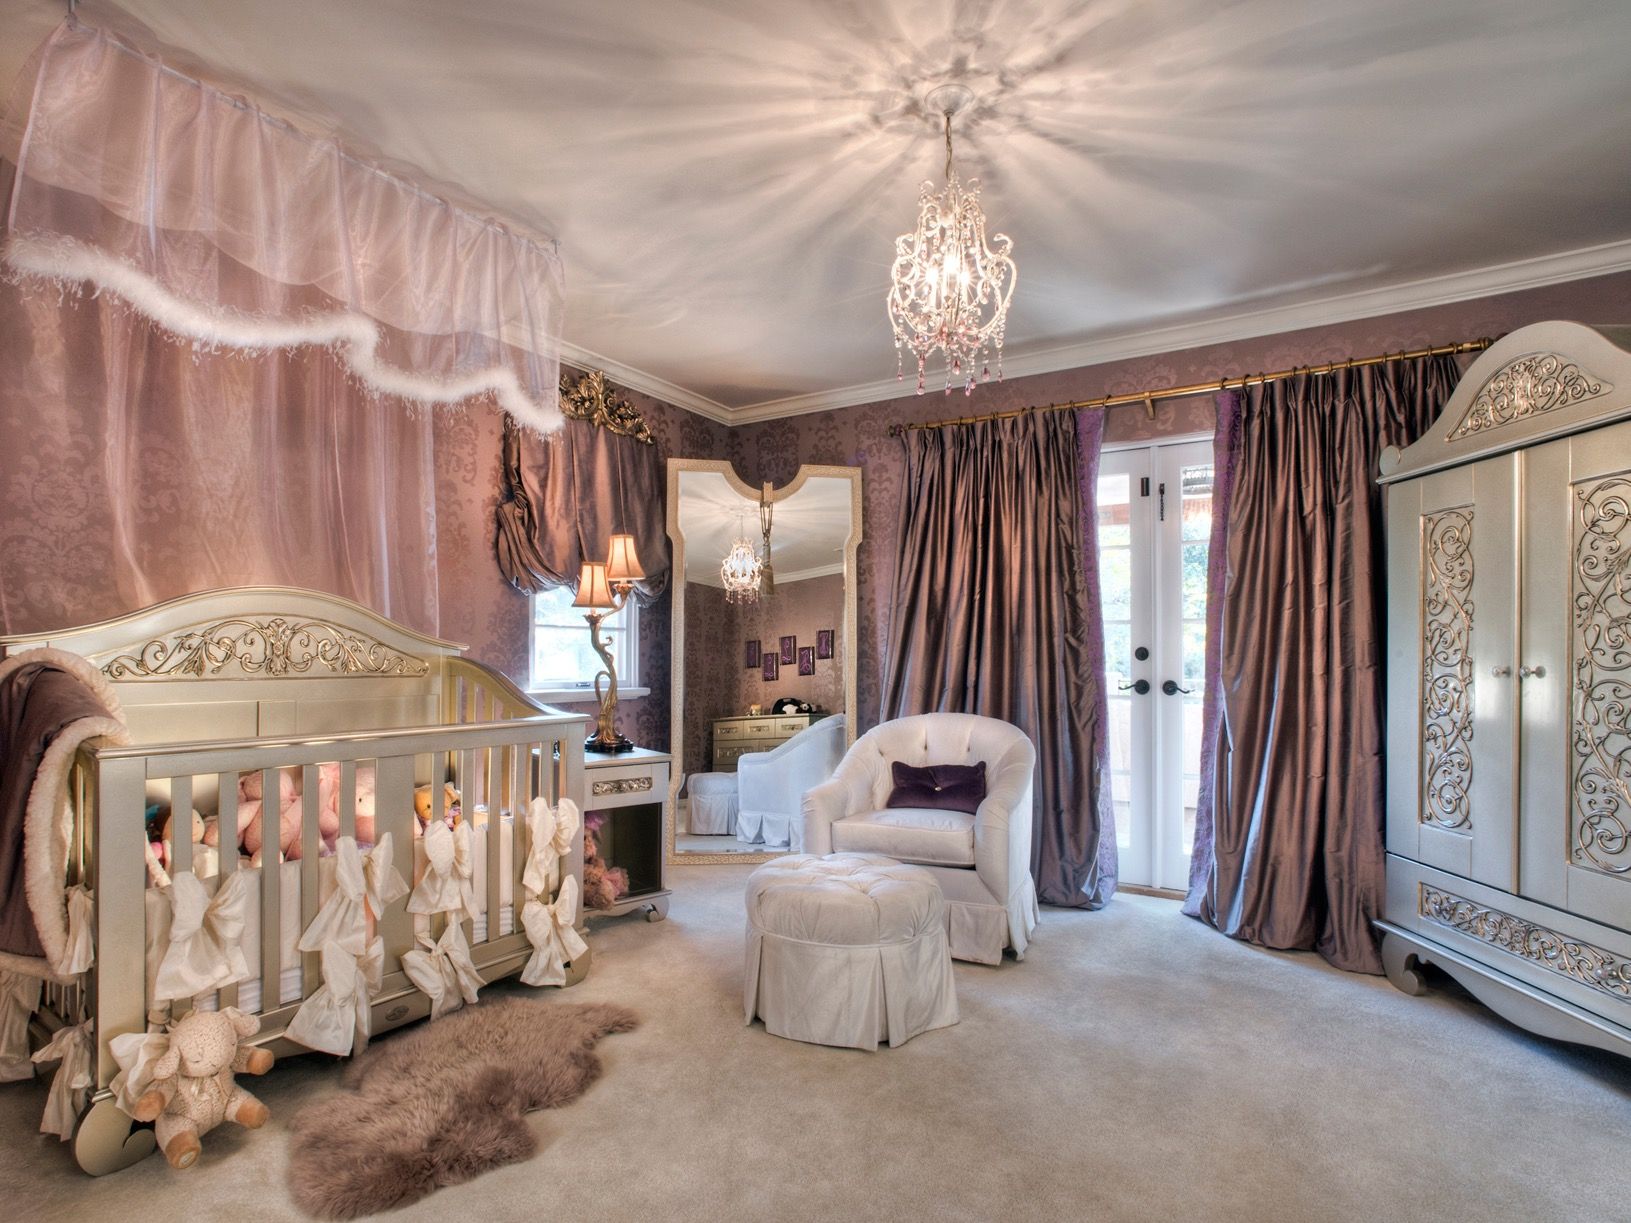 Classic Victorian Style Baby Room Decoration With Chandelier Lighting (View 3 of 33)